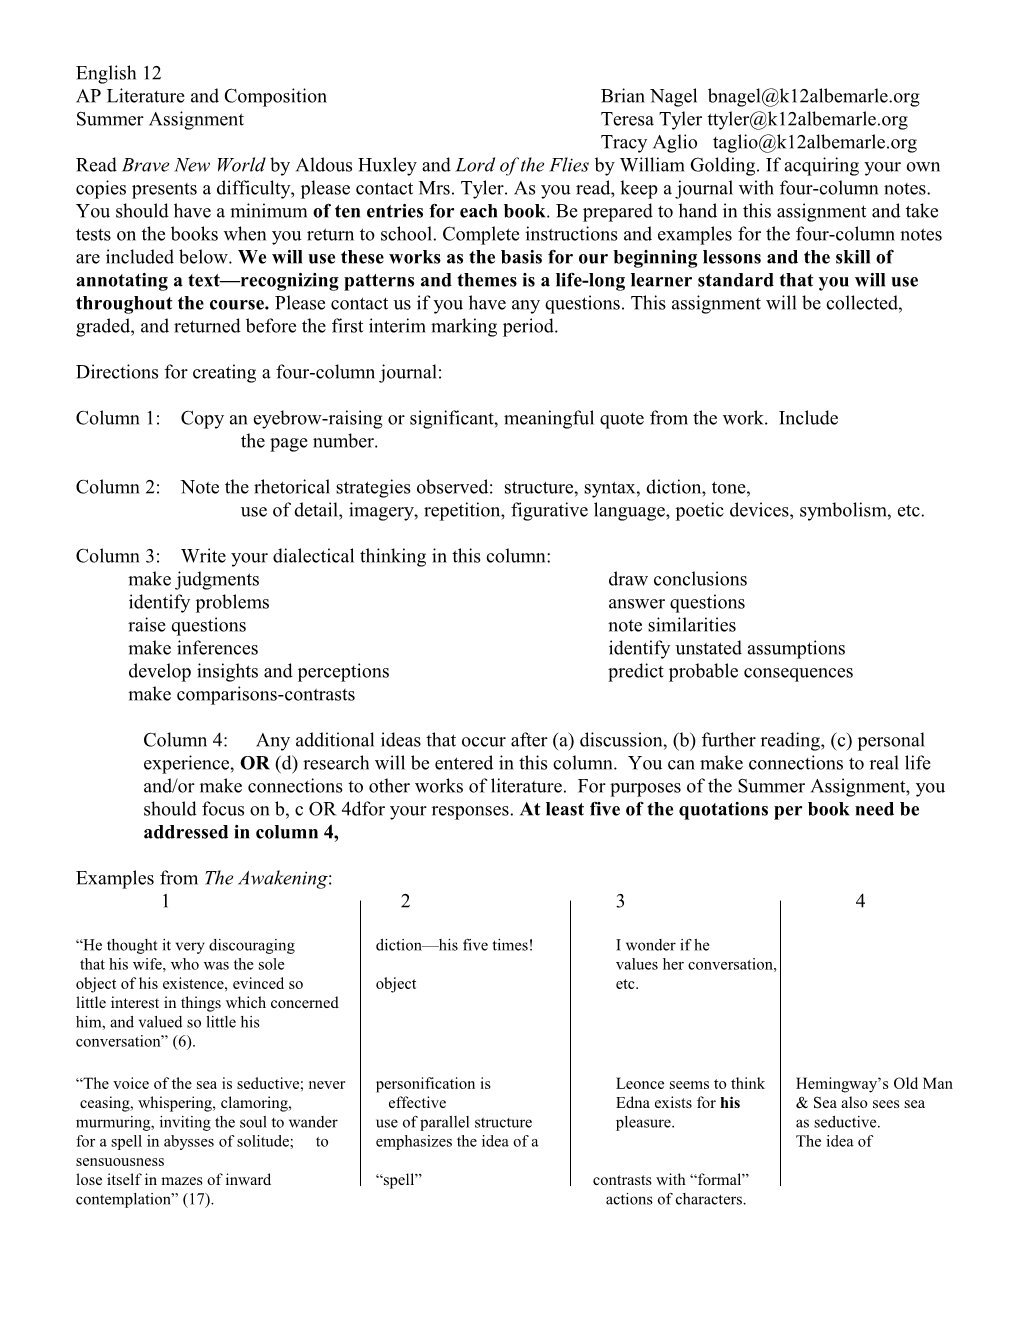 English 12 AP Literature and Composition Summer Assignment